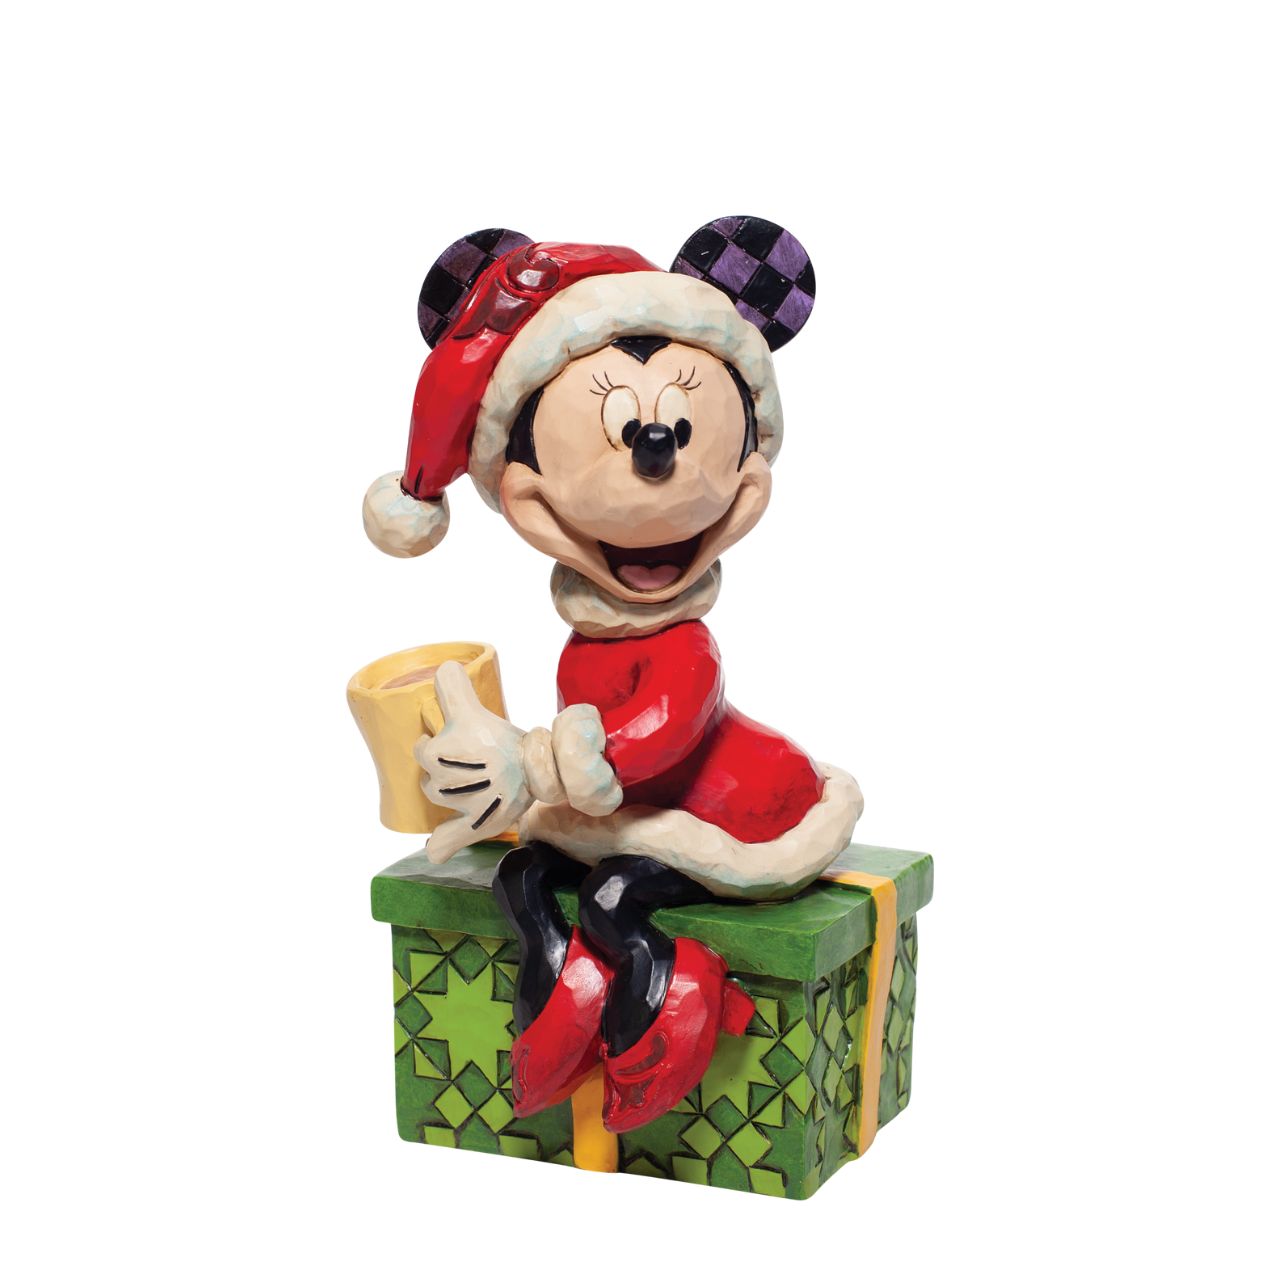 Disney Minnie Mouse with Hot Chocolate Figurine  Dressed in a dainty Santa skirt and hat, Minnie soaks in the holiday spirit. Sipping from a cup of hot chocolate, this sweet mouse celebrates the most wonderful time of the year in style. Once again, Jim Shore captures the magic of Disney.